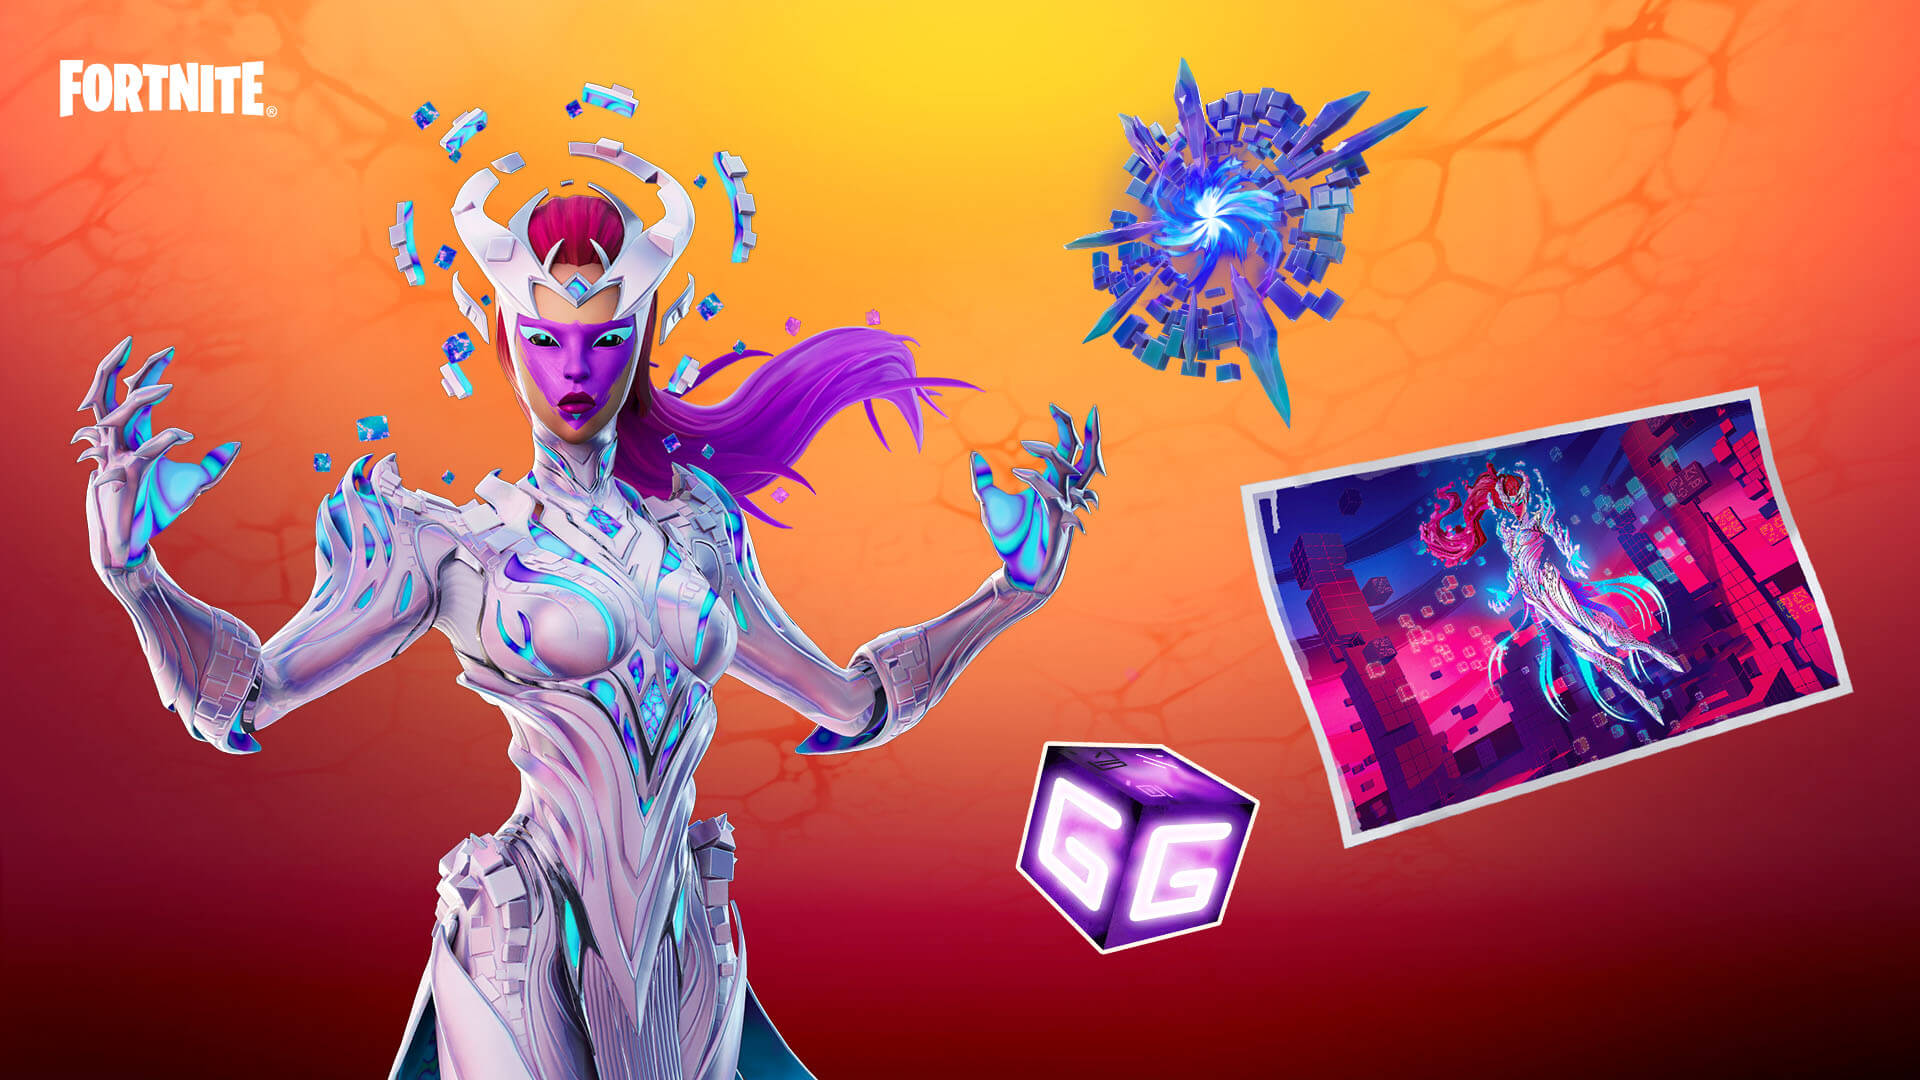 Fortnite: The Cube Queen can now be unlocked